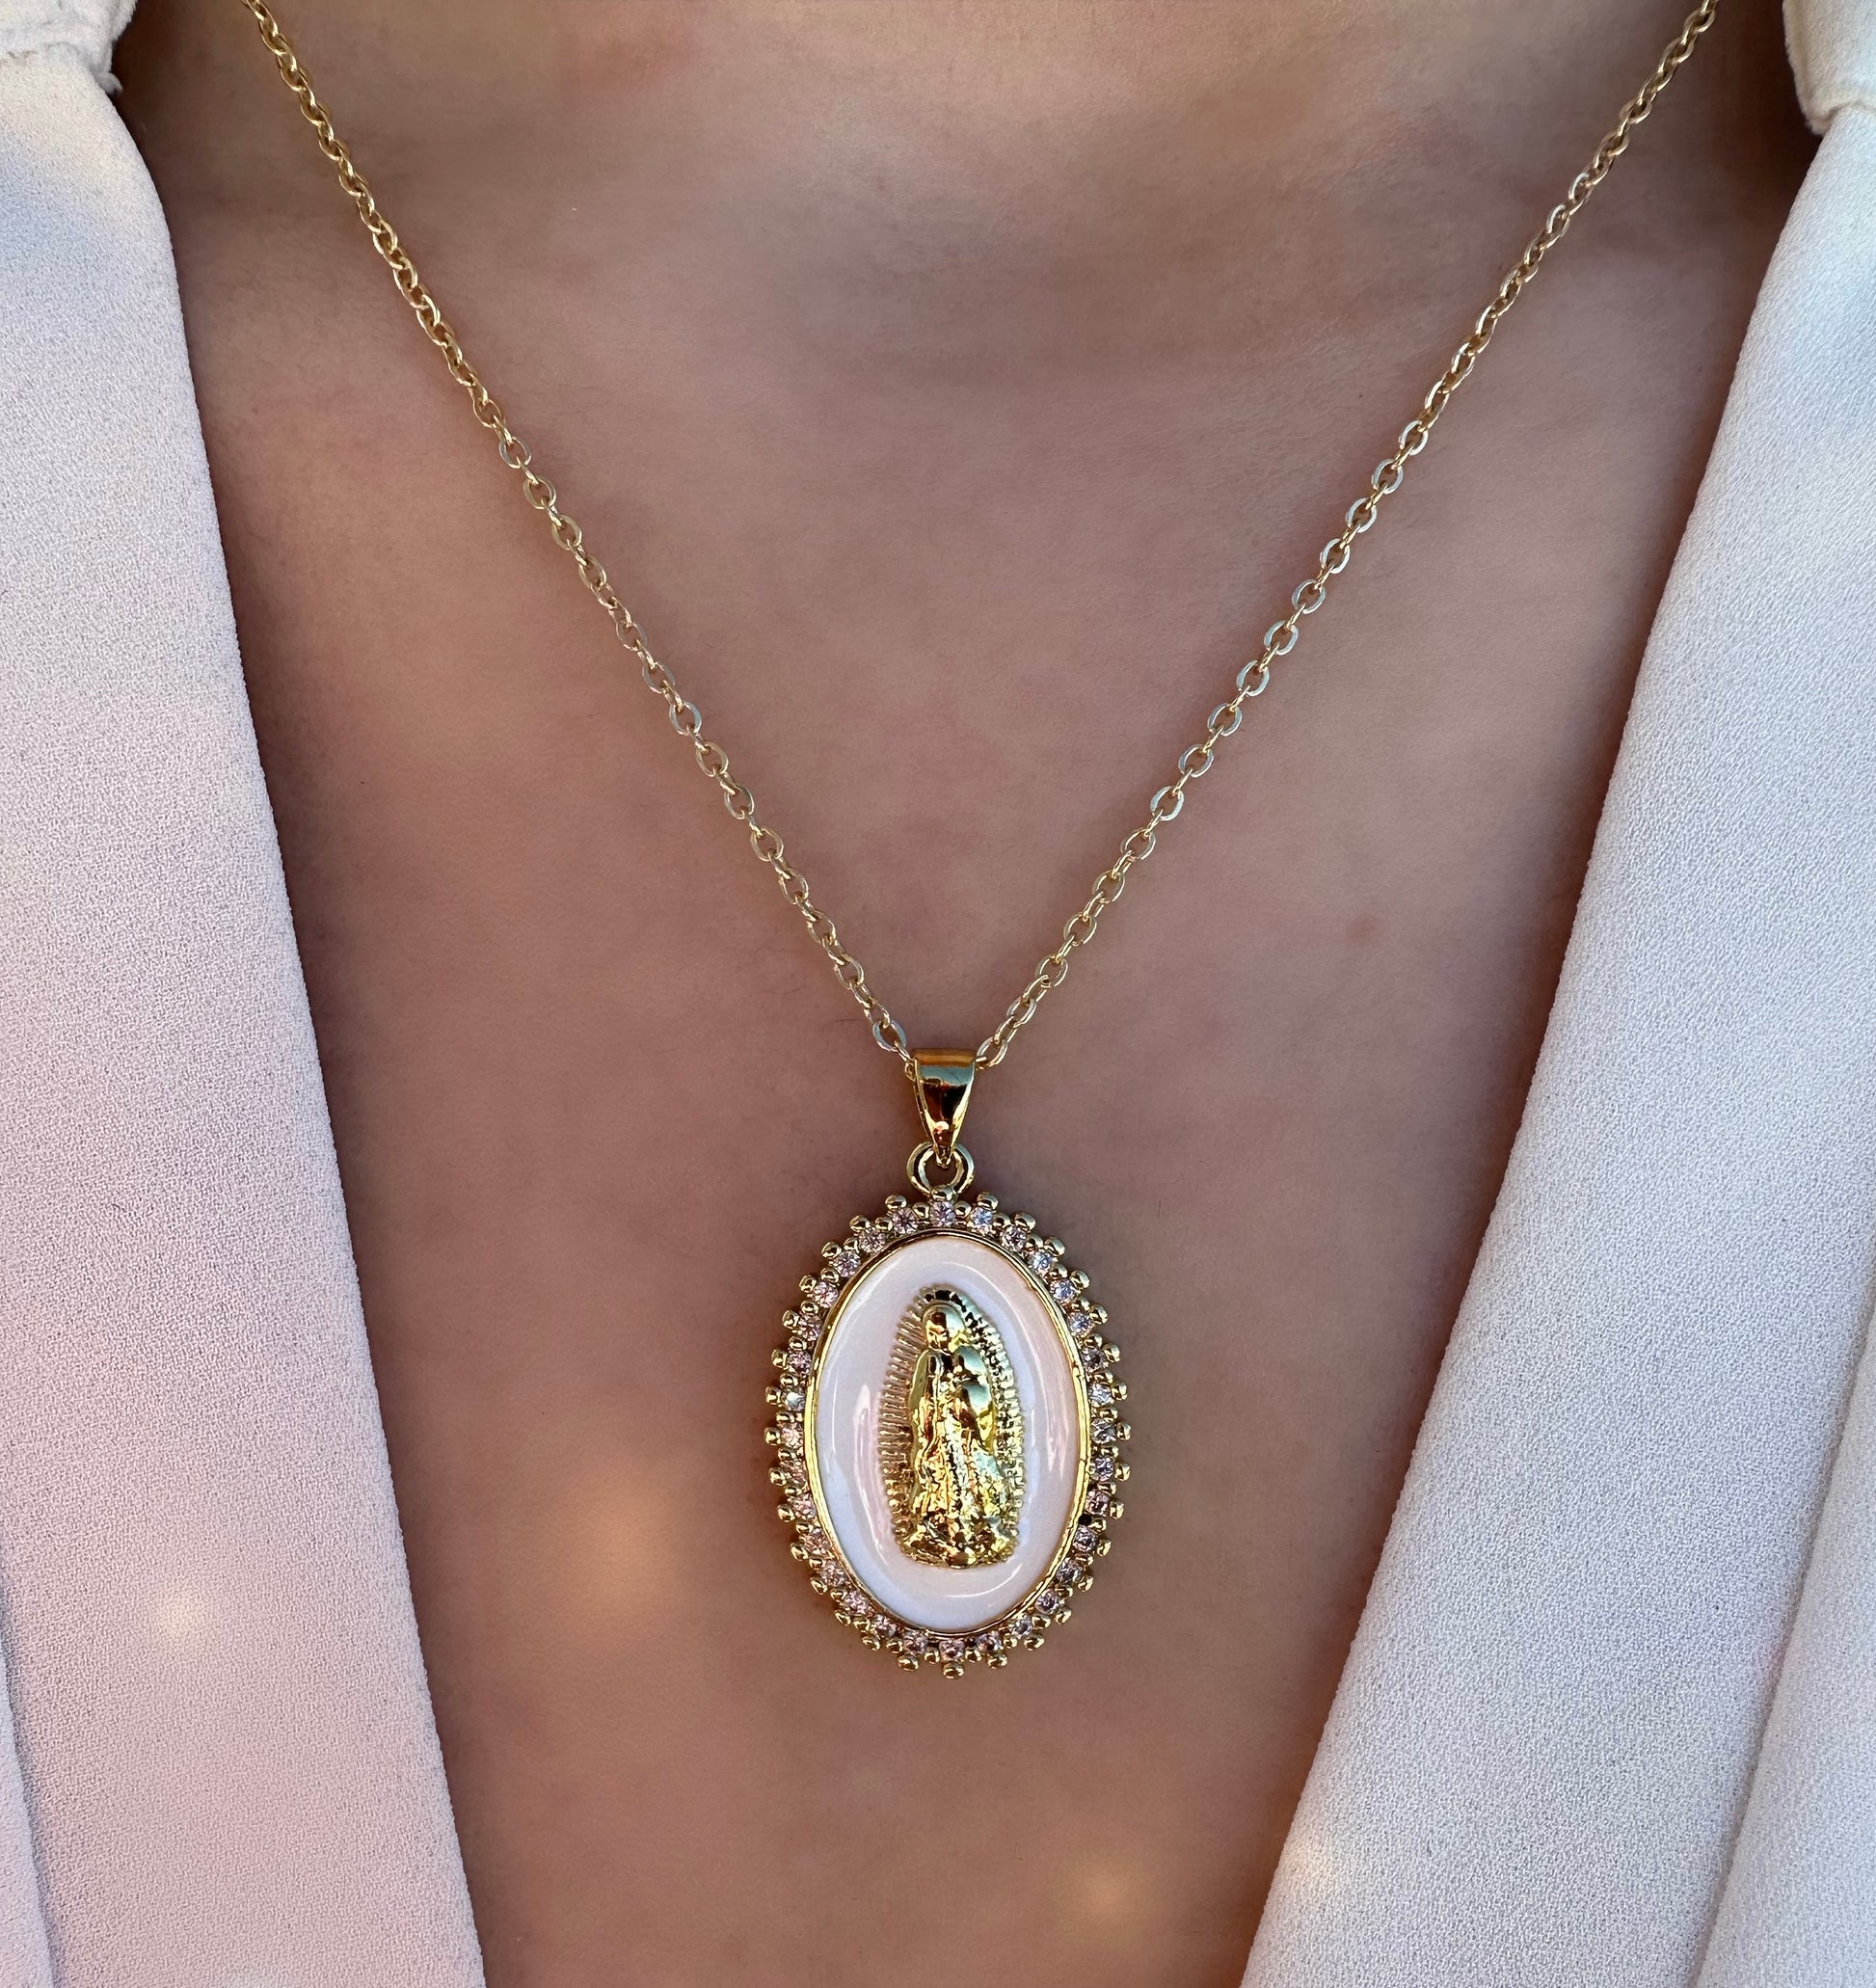 virgin mary necklace, mother mary necklace, gold diamond virgin mary necklace, virgin mary pendant, catholic gifts, christian gifts, bridal gift, protection necklace, our lady of guadalupe necklace, dainty mary necklace, christian jewelry, catholic jewelry, catholic necklace, christian necklace